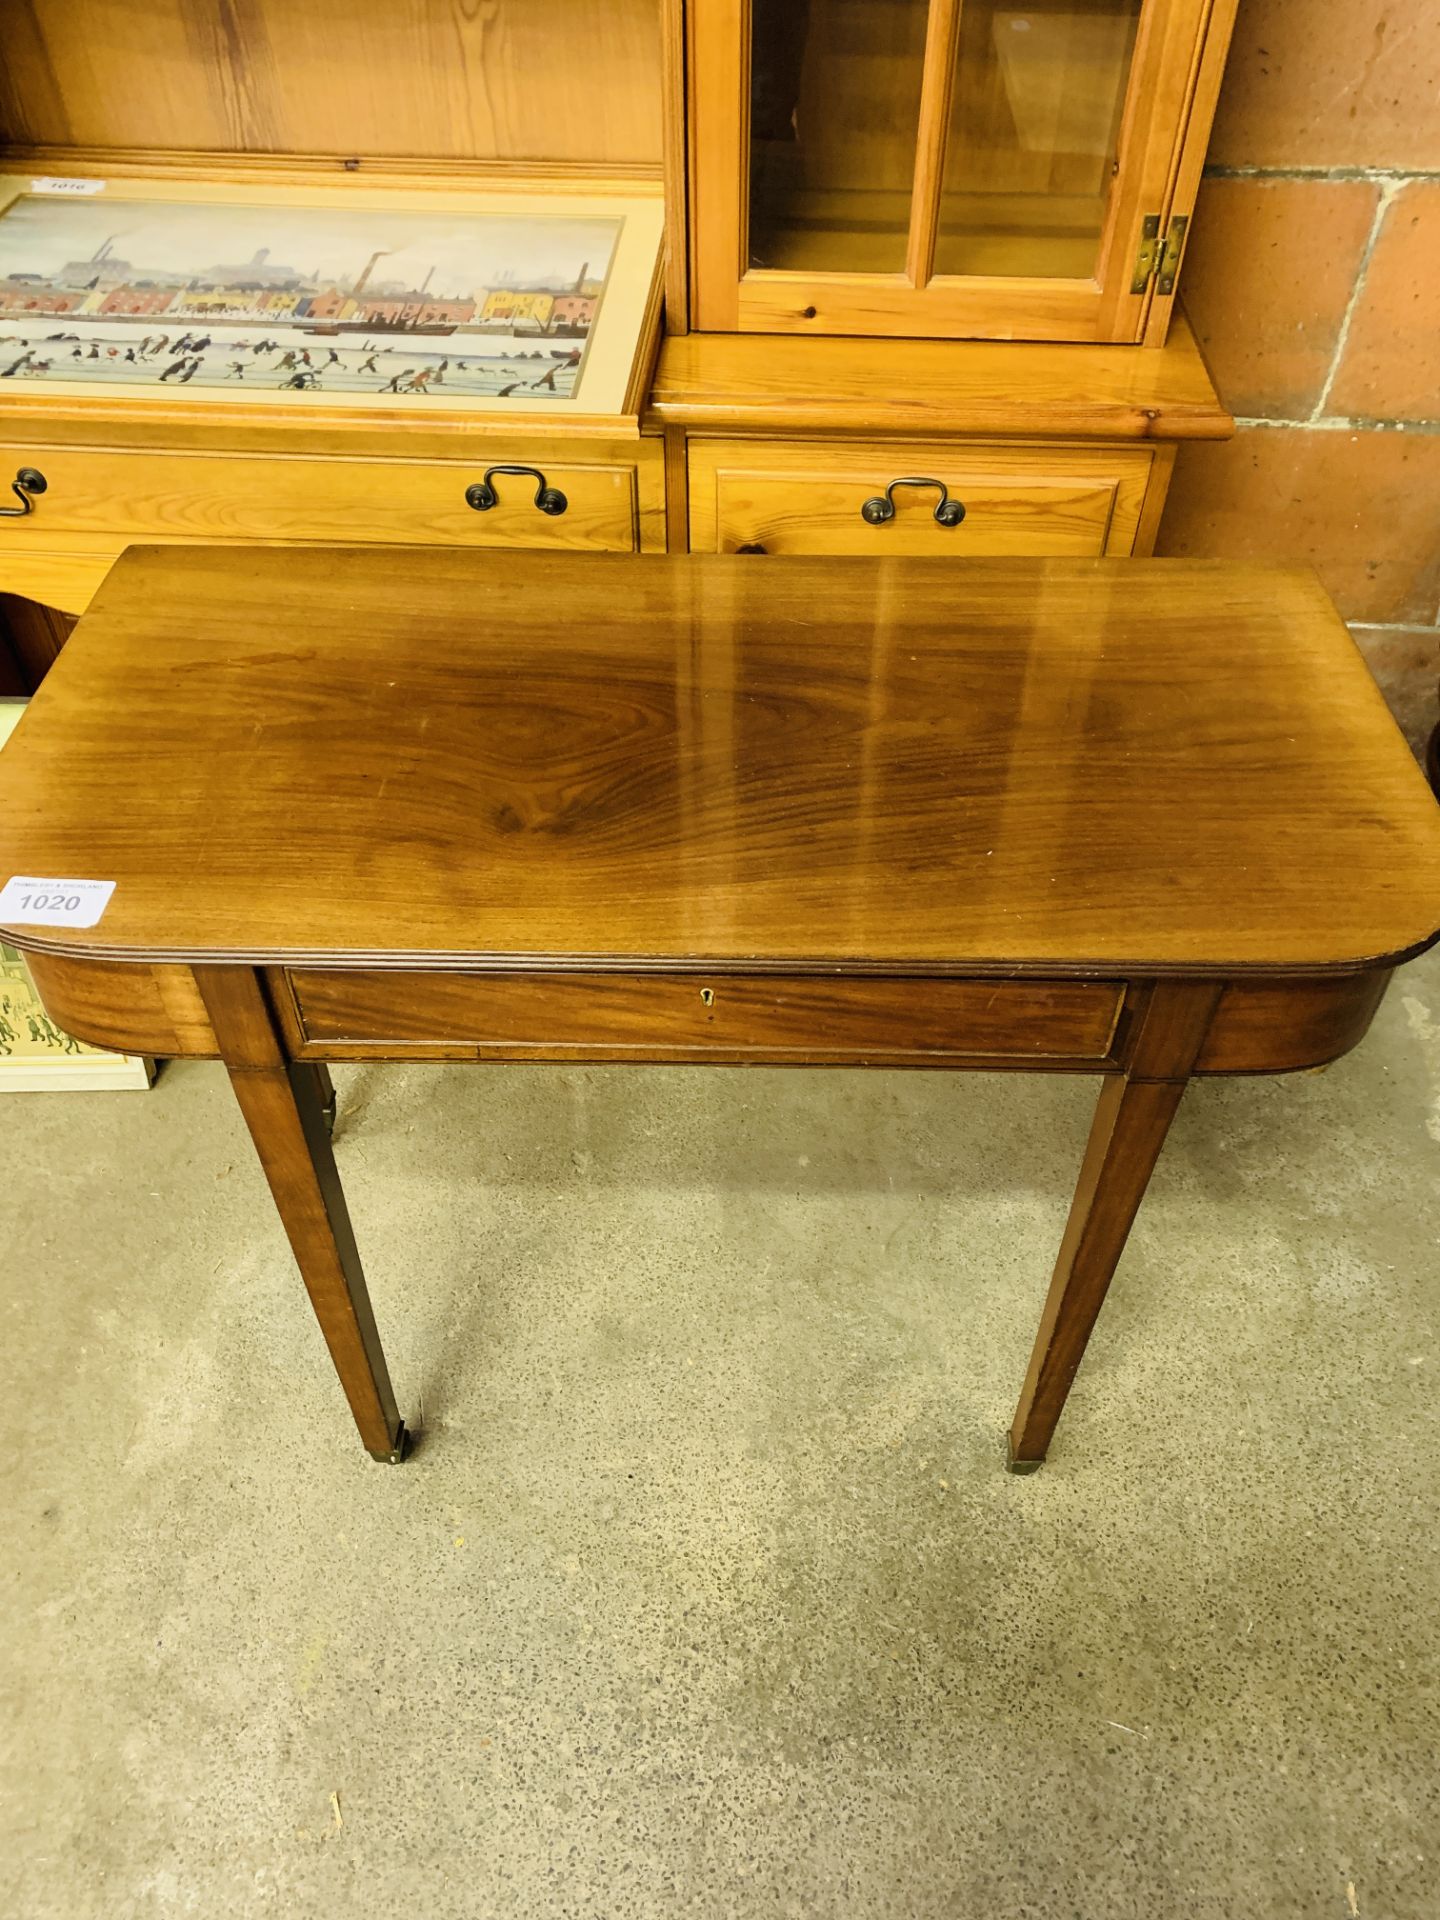 Mahogany side table with frieze drawer. - Image 2 of 3